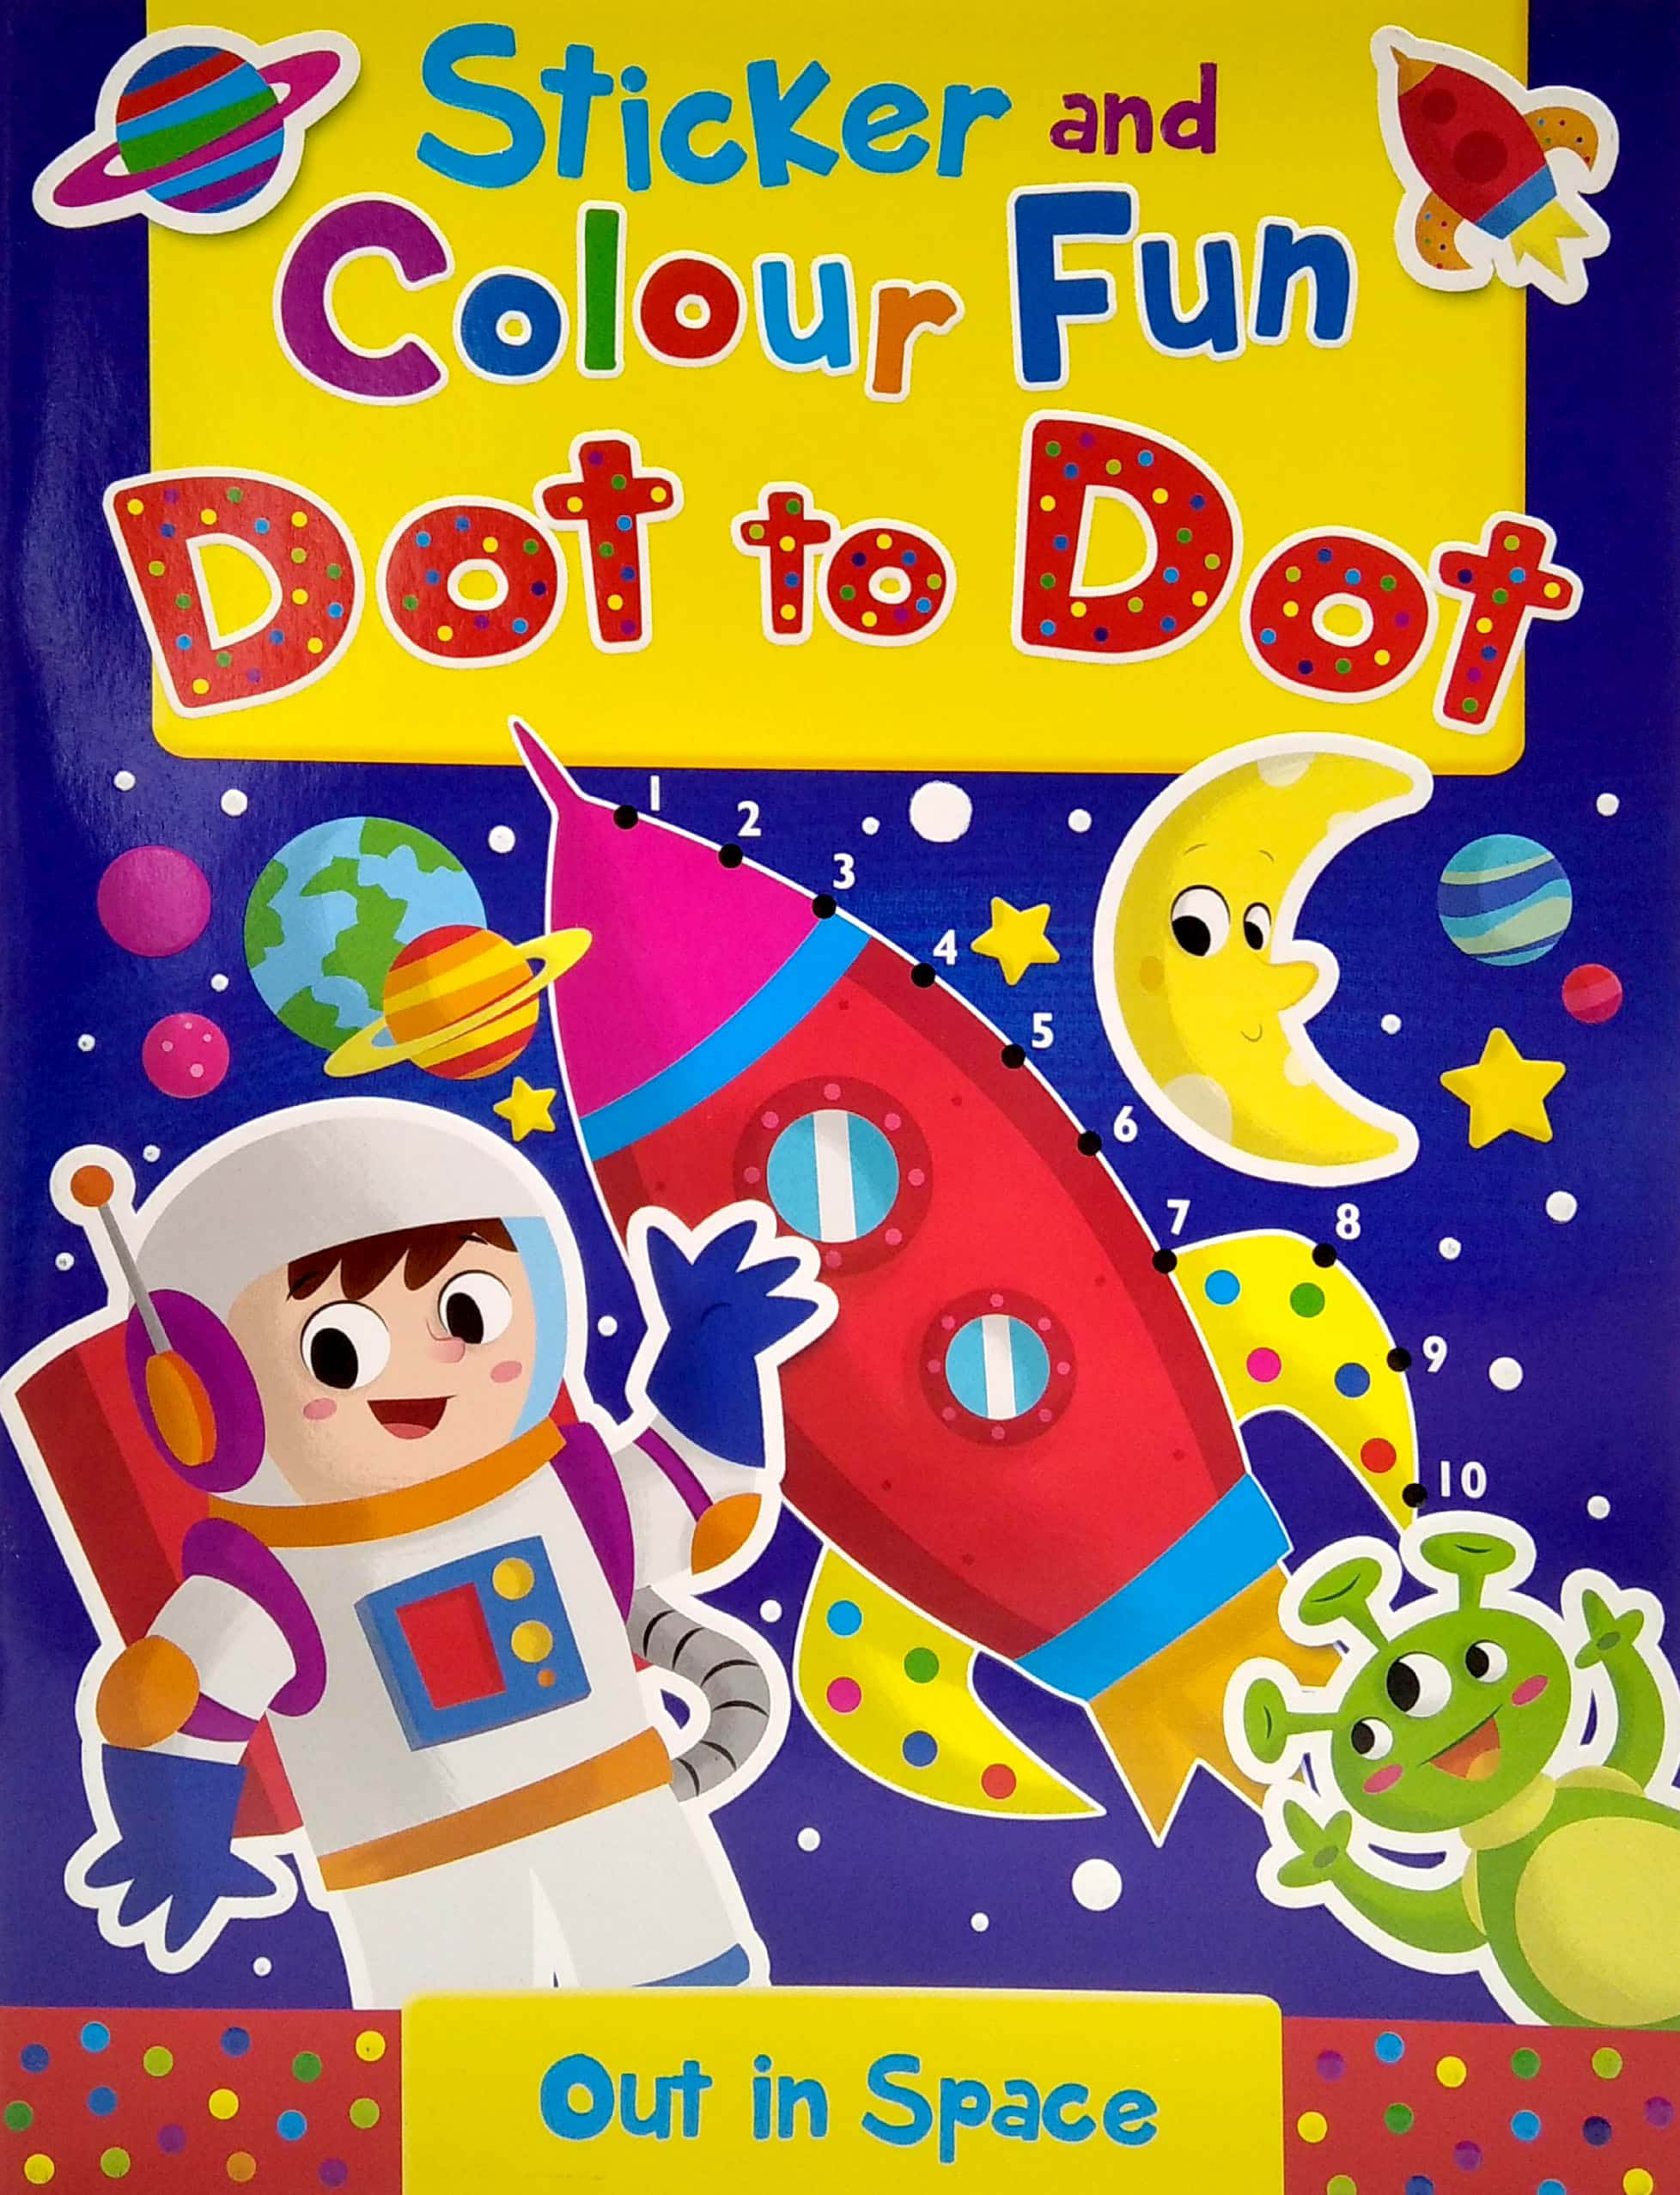 Sticker and Colour Fun Dot to Dot Out in Space